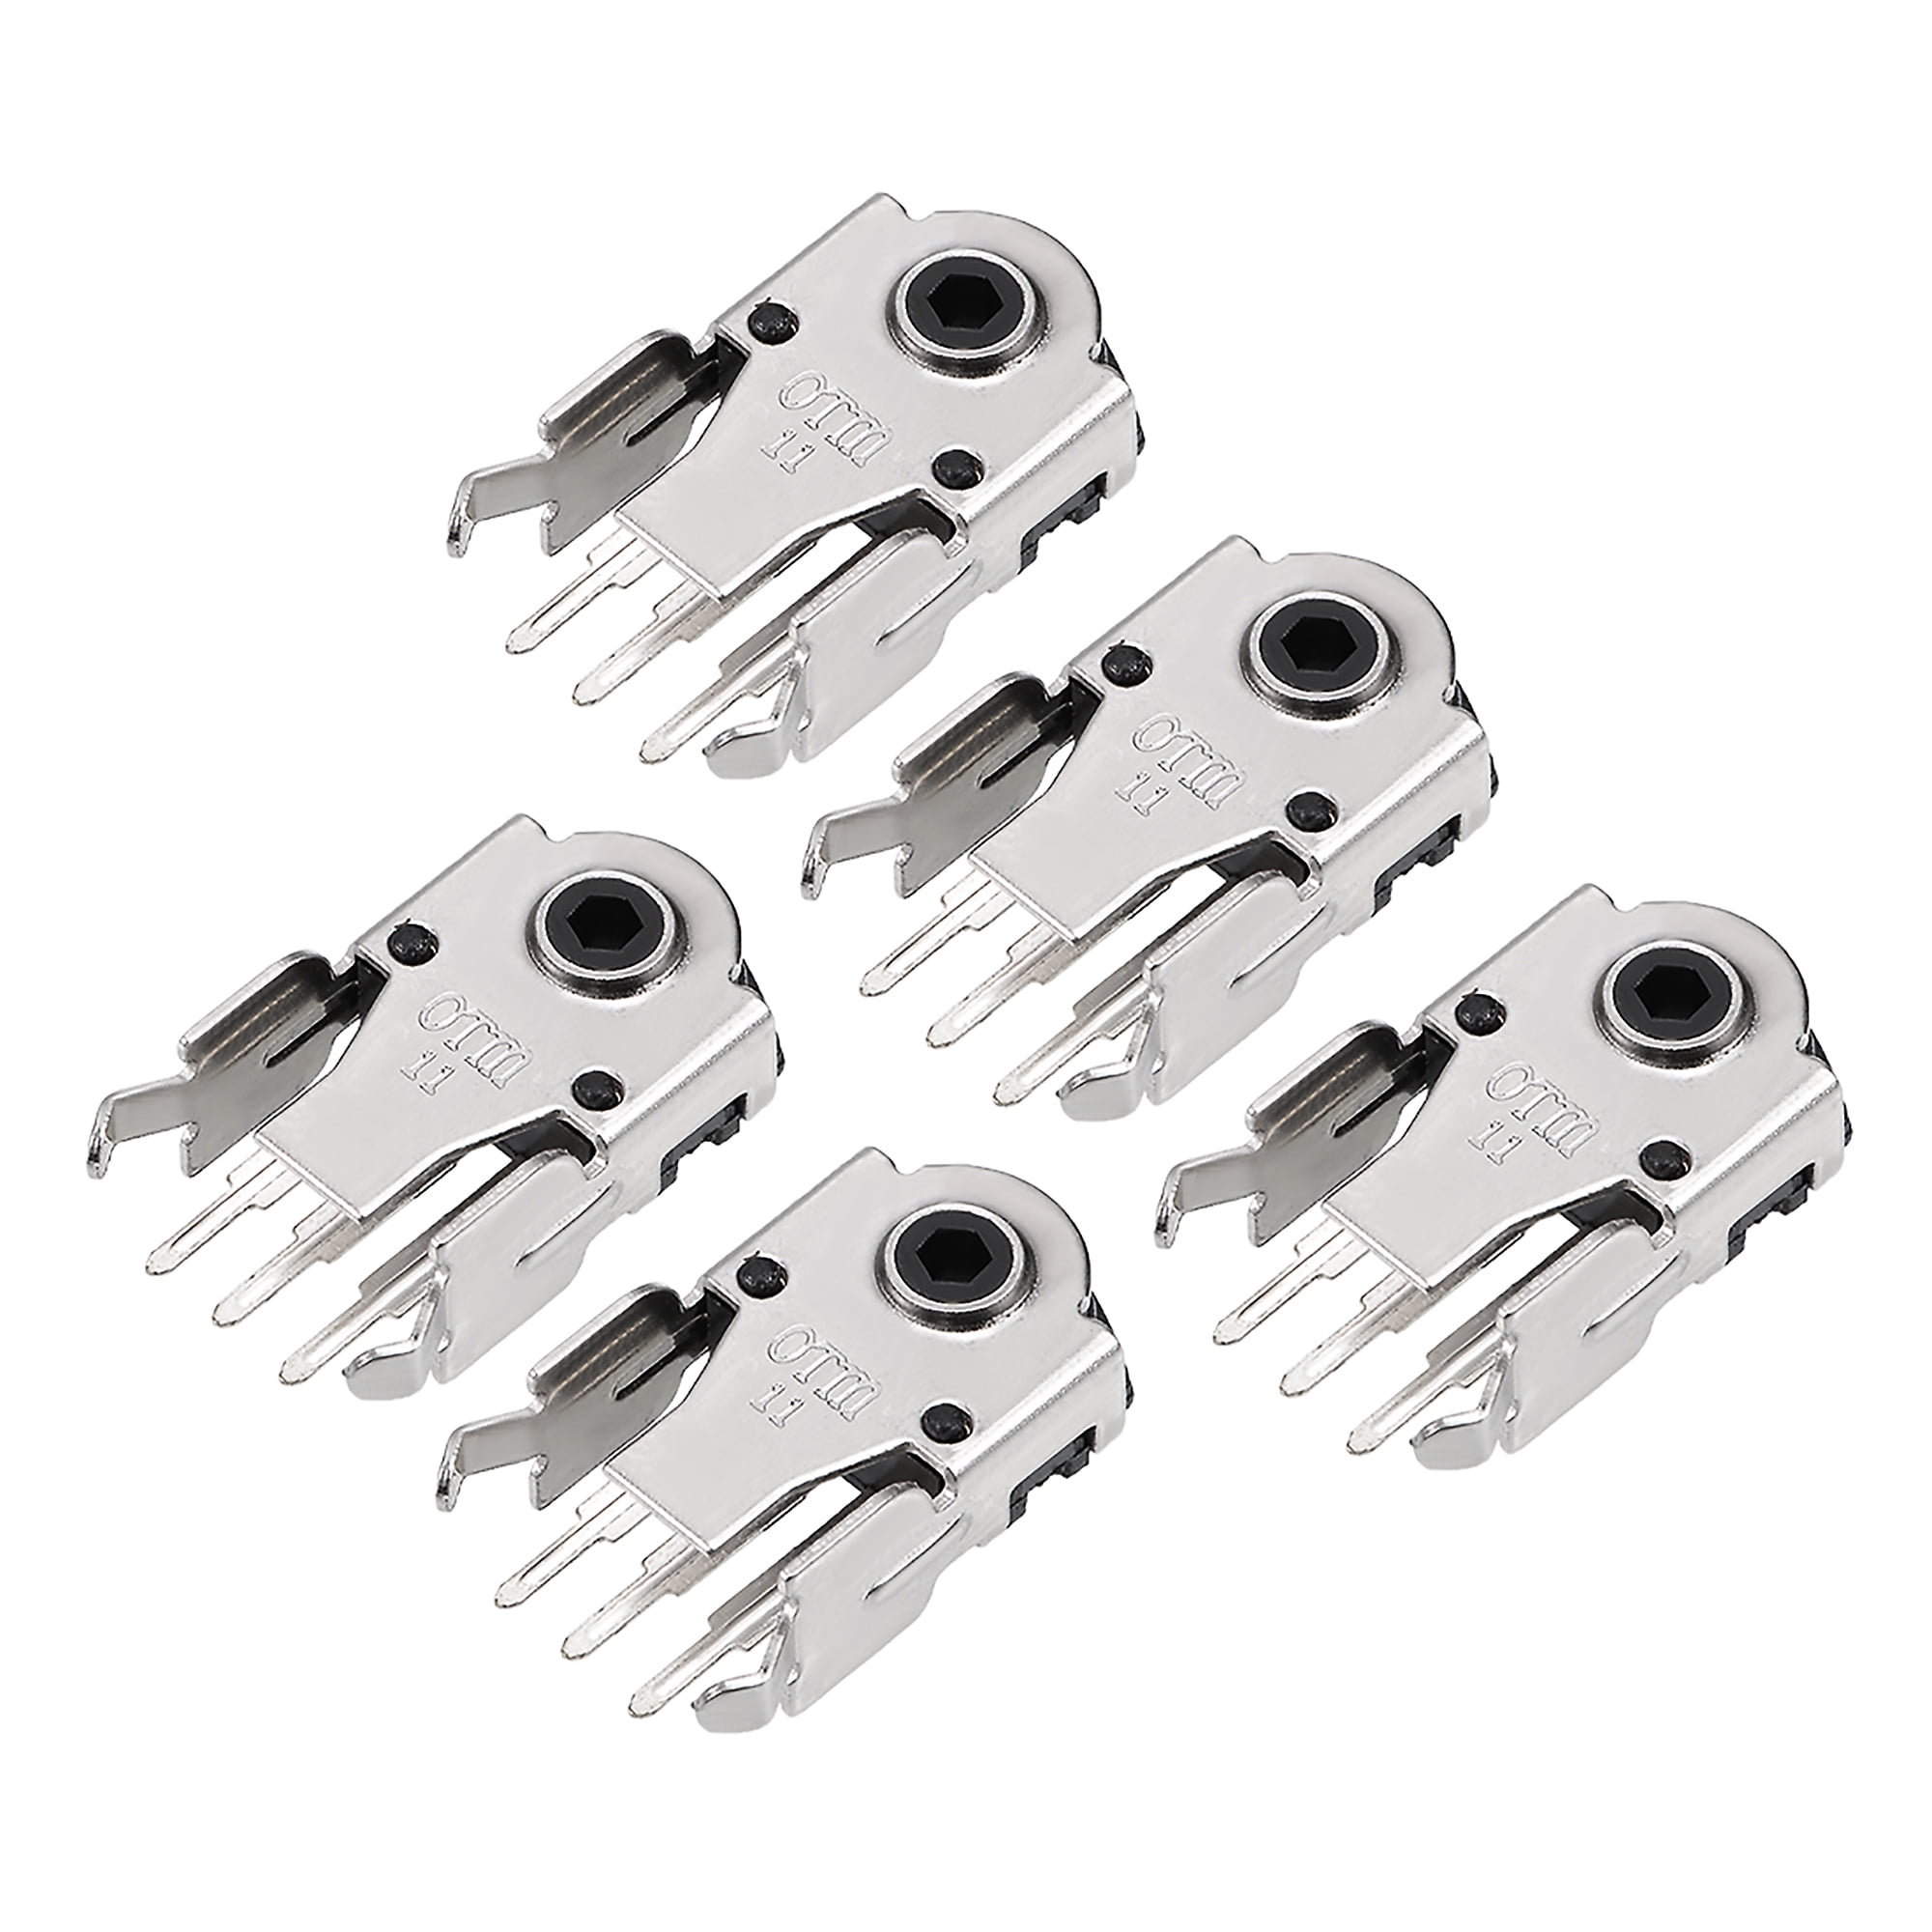 5 Pcs 11mm Mouse Encoder Scroll Wheel Repair Part Switch 